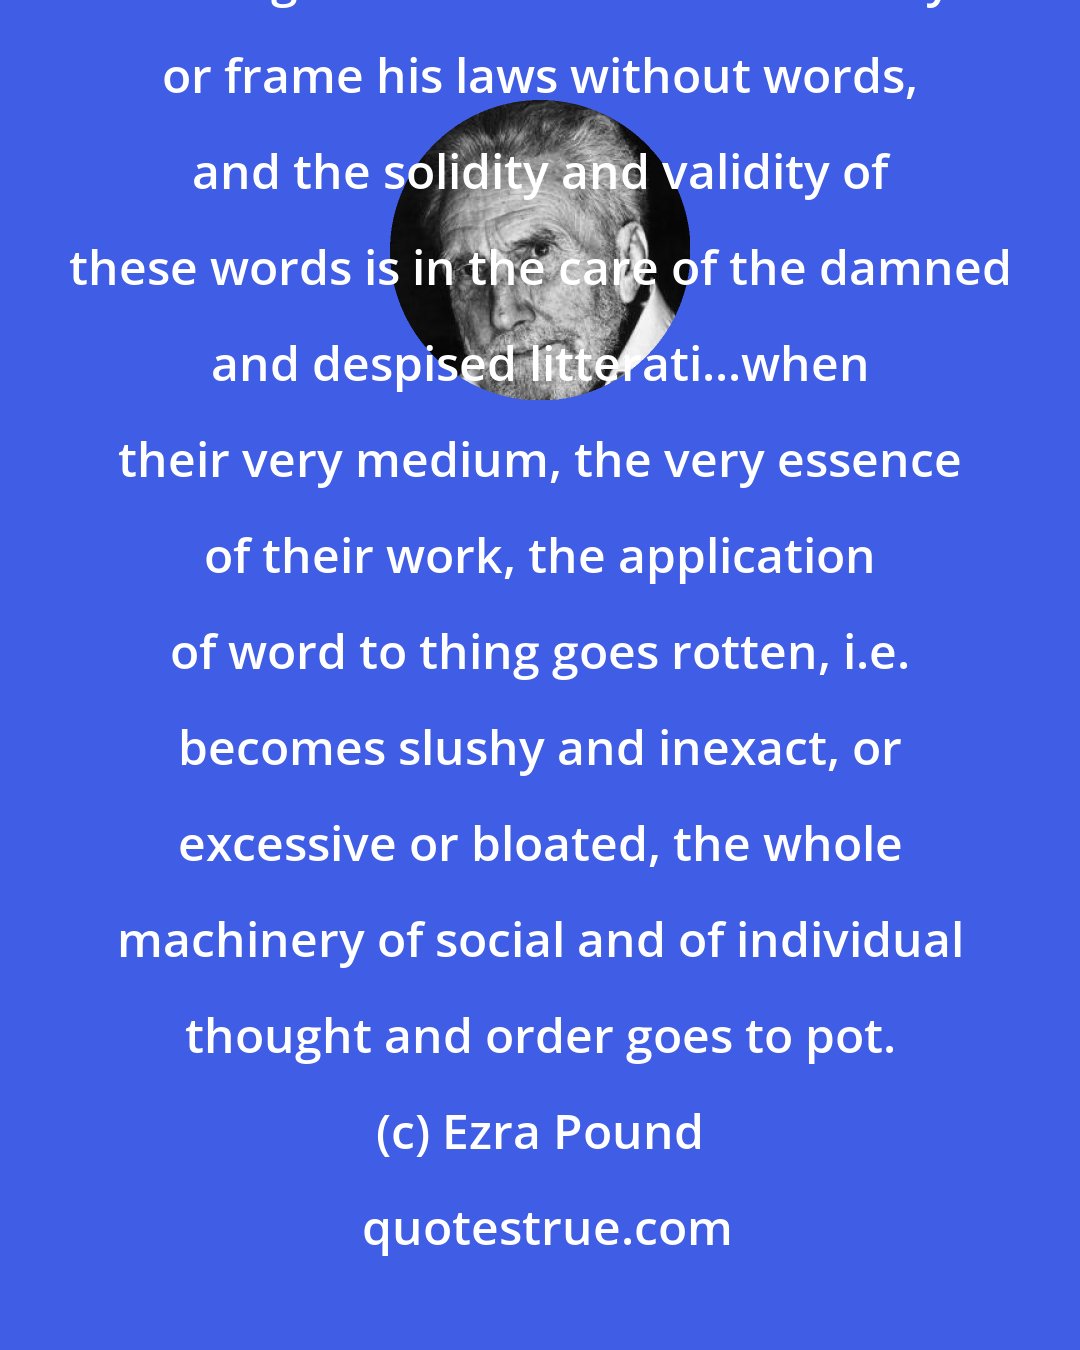 Ezra Pound: The individual cannot think and communicate his thought, the governor and legislator cannot act effectively or frame his laws without words, and the solidity and validity of these words is in the care of the damned and despised litterati...when their very medium, the very essence of their work, the application of word to thing goes rotten, i.e. becomes slushy and inexact, or excessive or bloated, the whole machinery of social and of individual thought and order goes to pot.